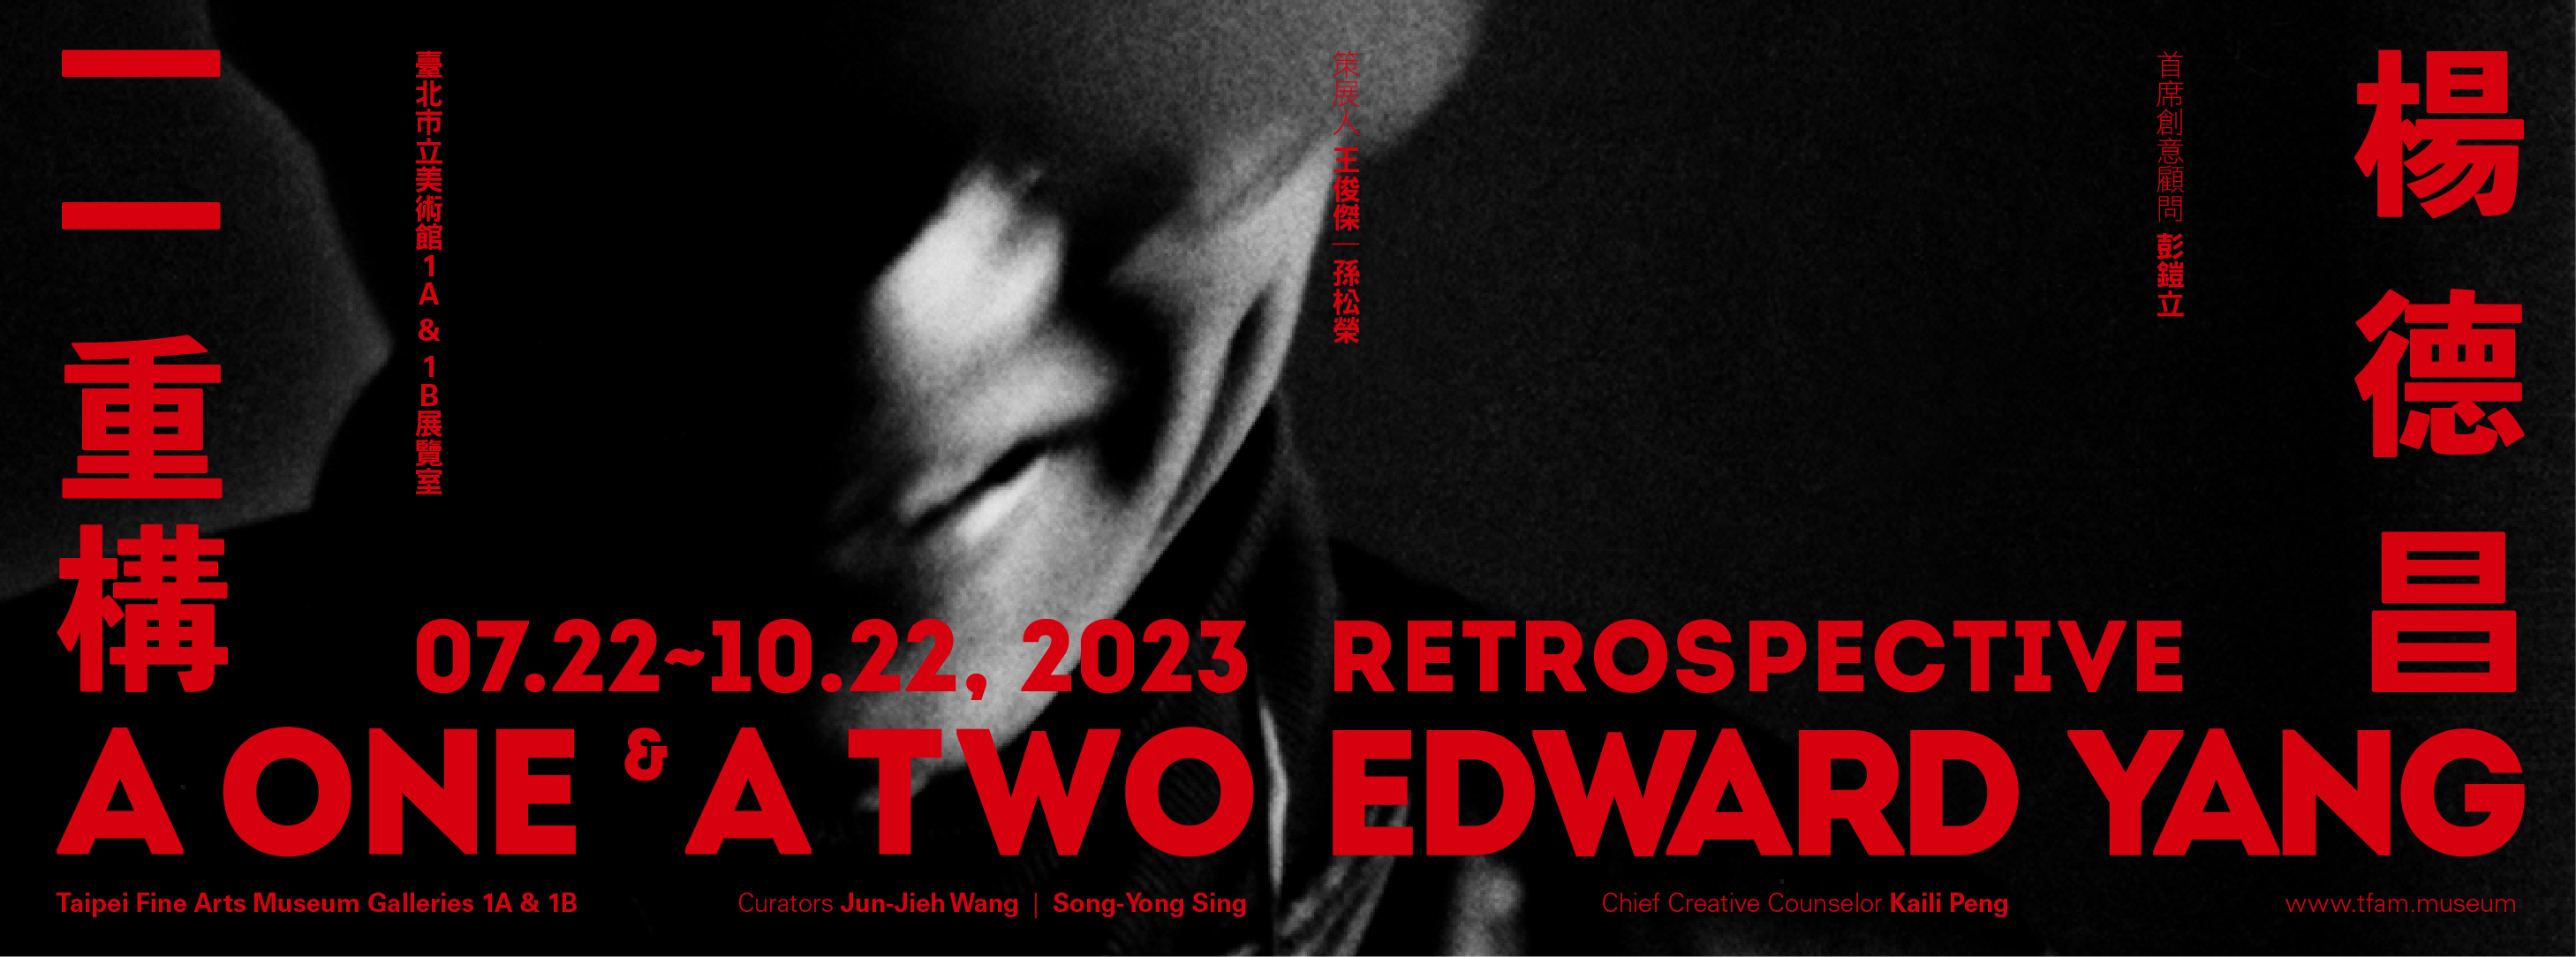 A One and A Two: Edward Yang Retrospective 的圖說